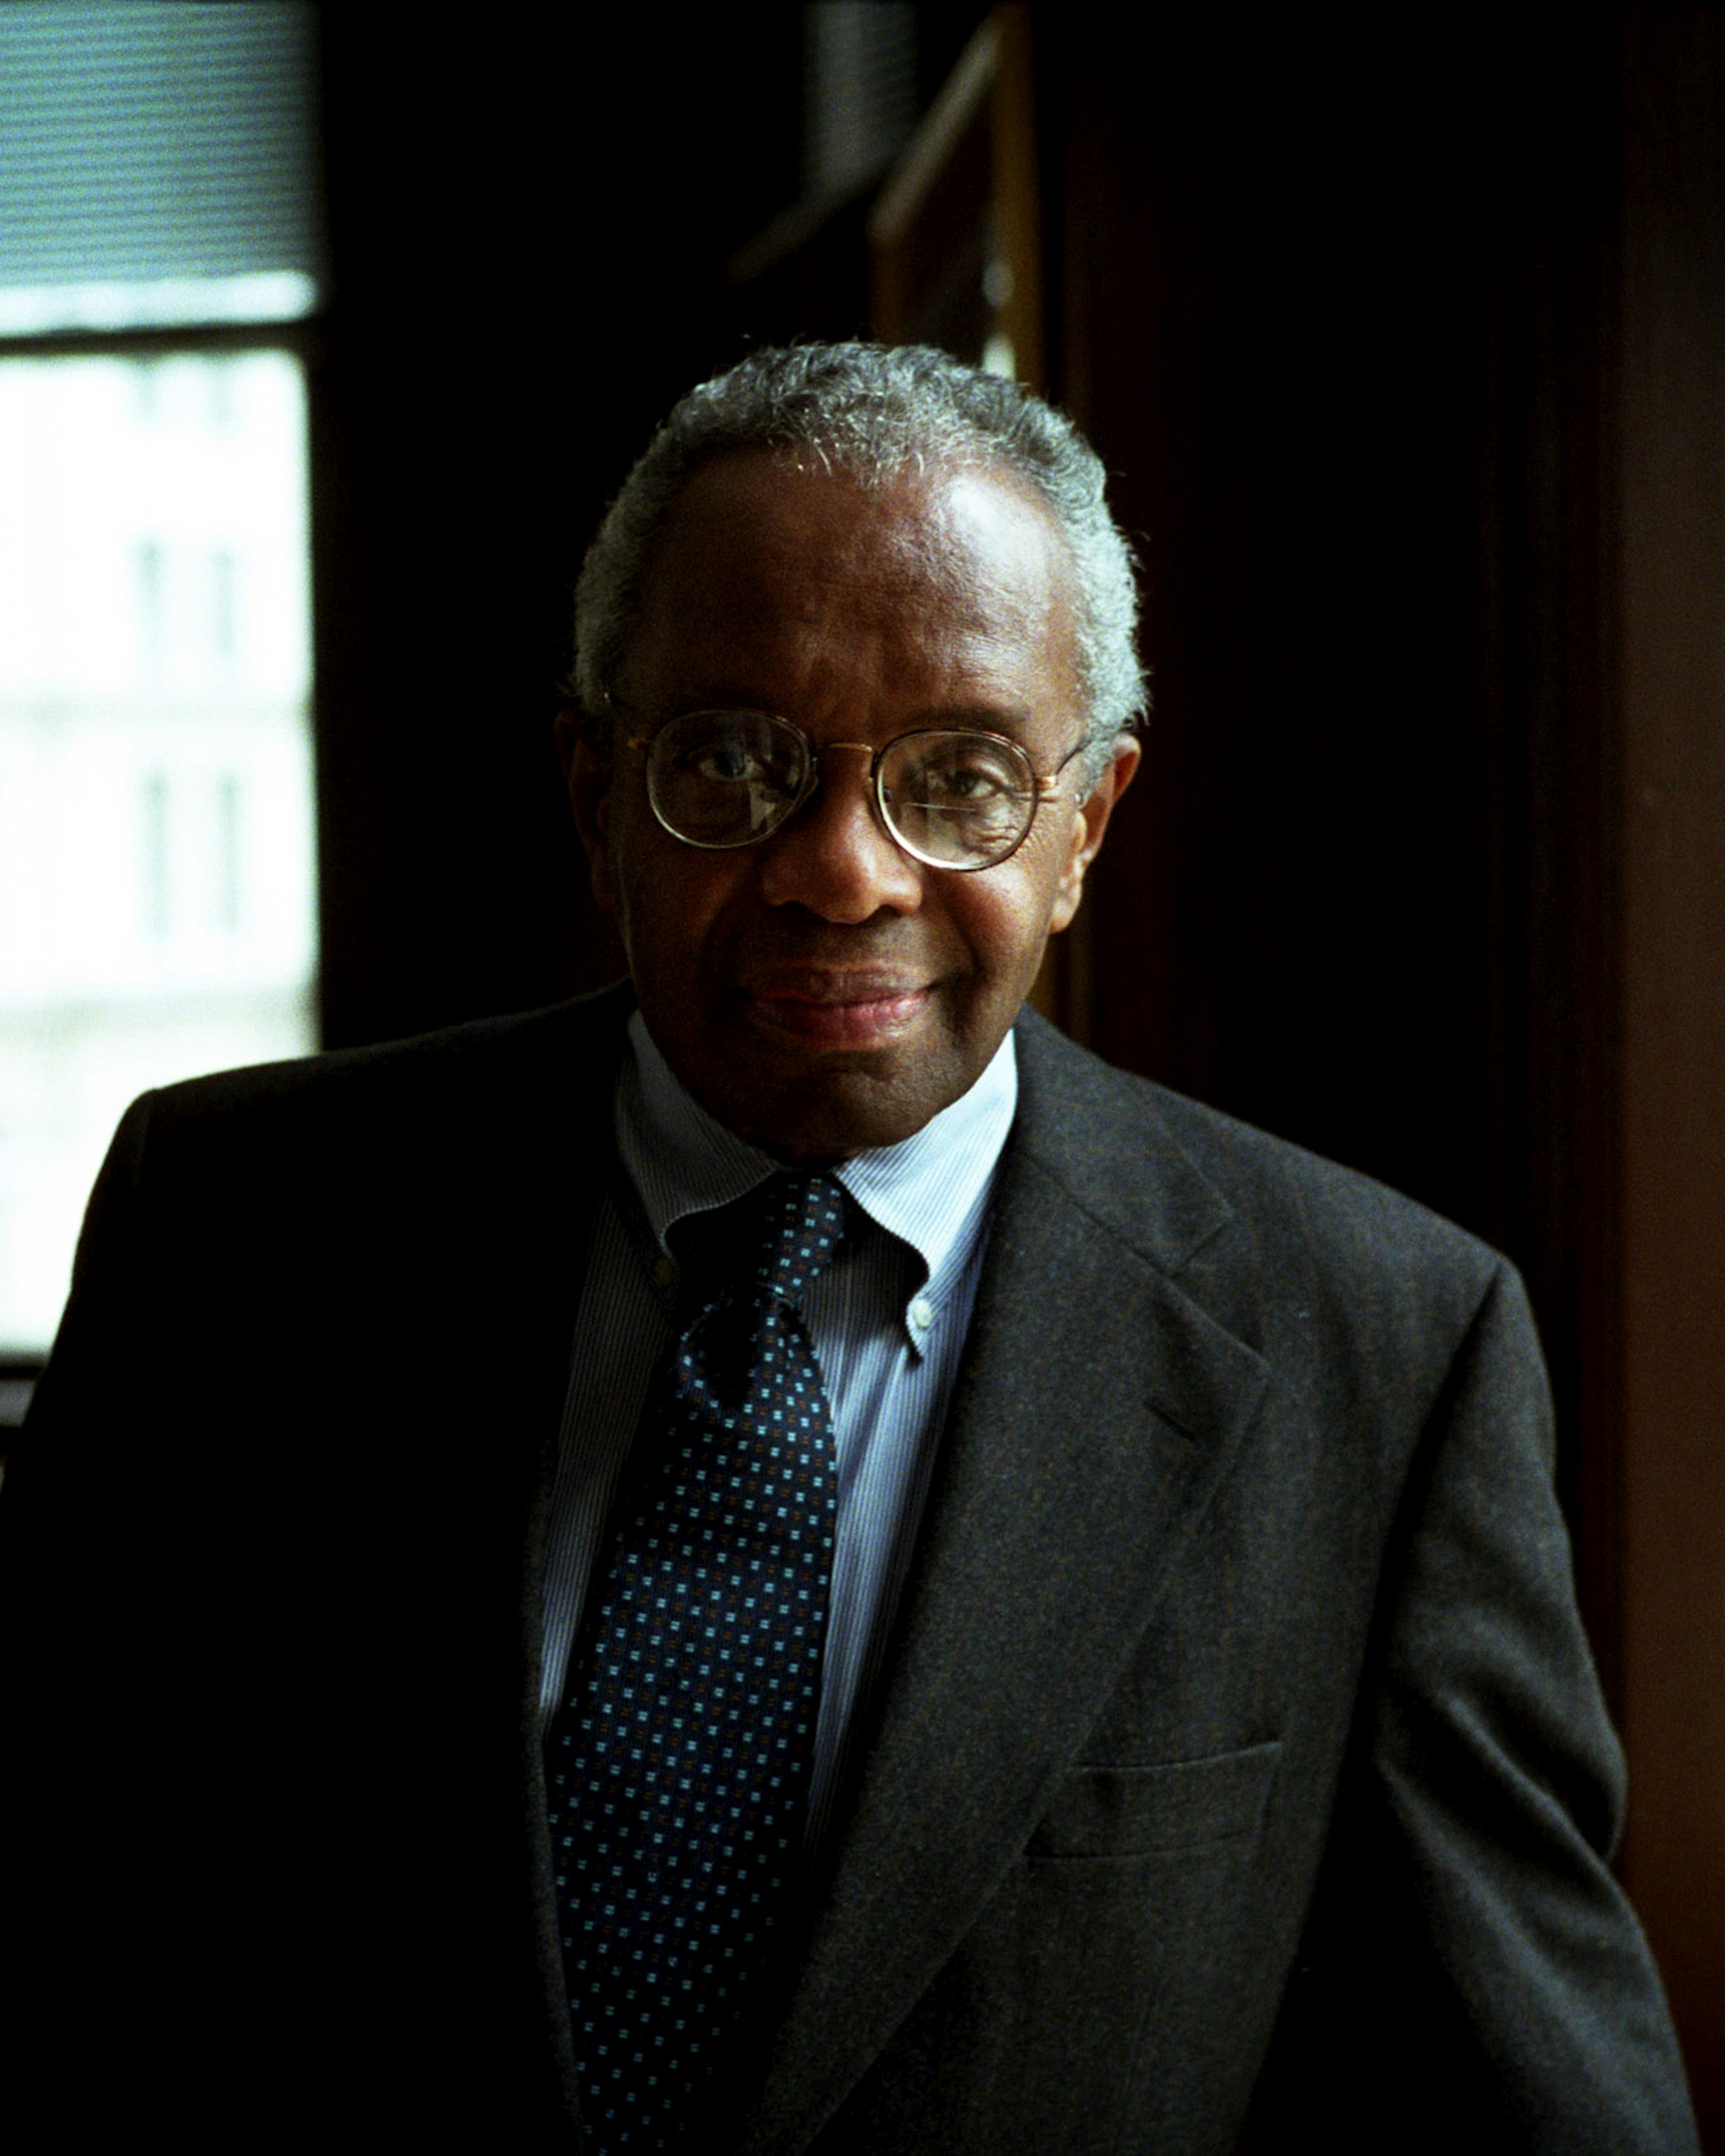 the first tenured African-American professor of Law at Harvard University, and largely credited as the originator of Critical Race Theory. (Photo by Neville Elder/Corbis via Getty Images)